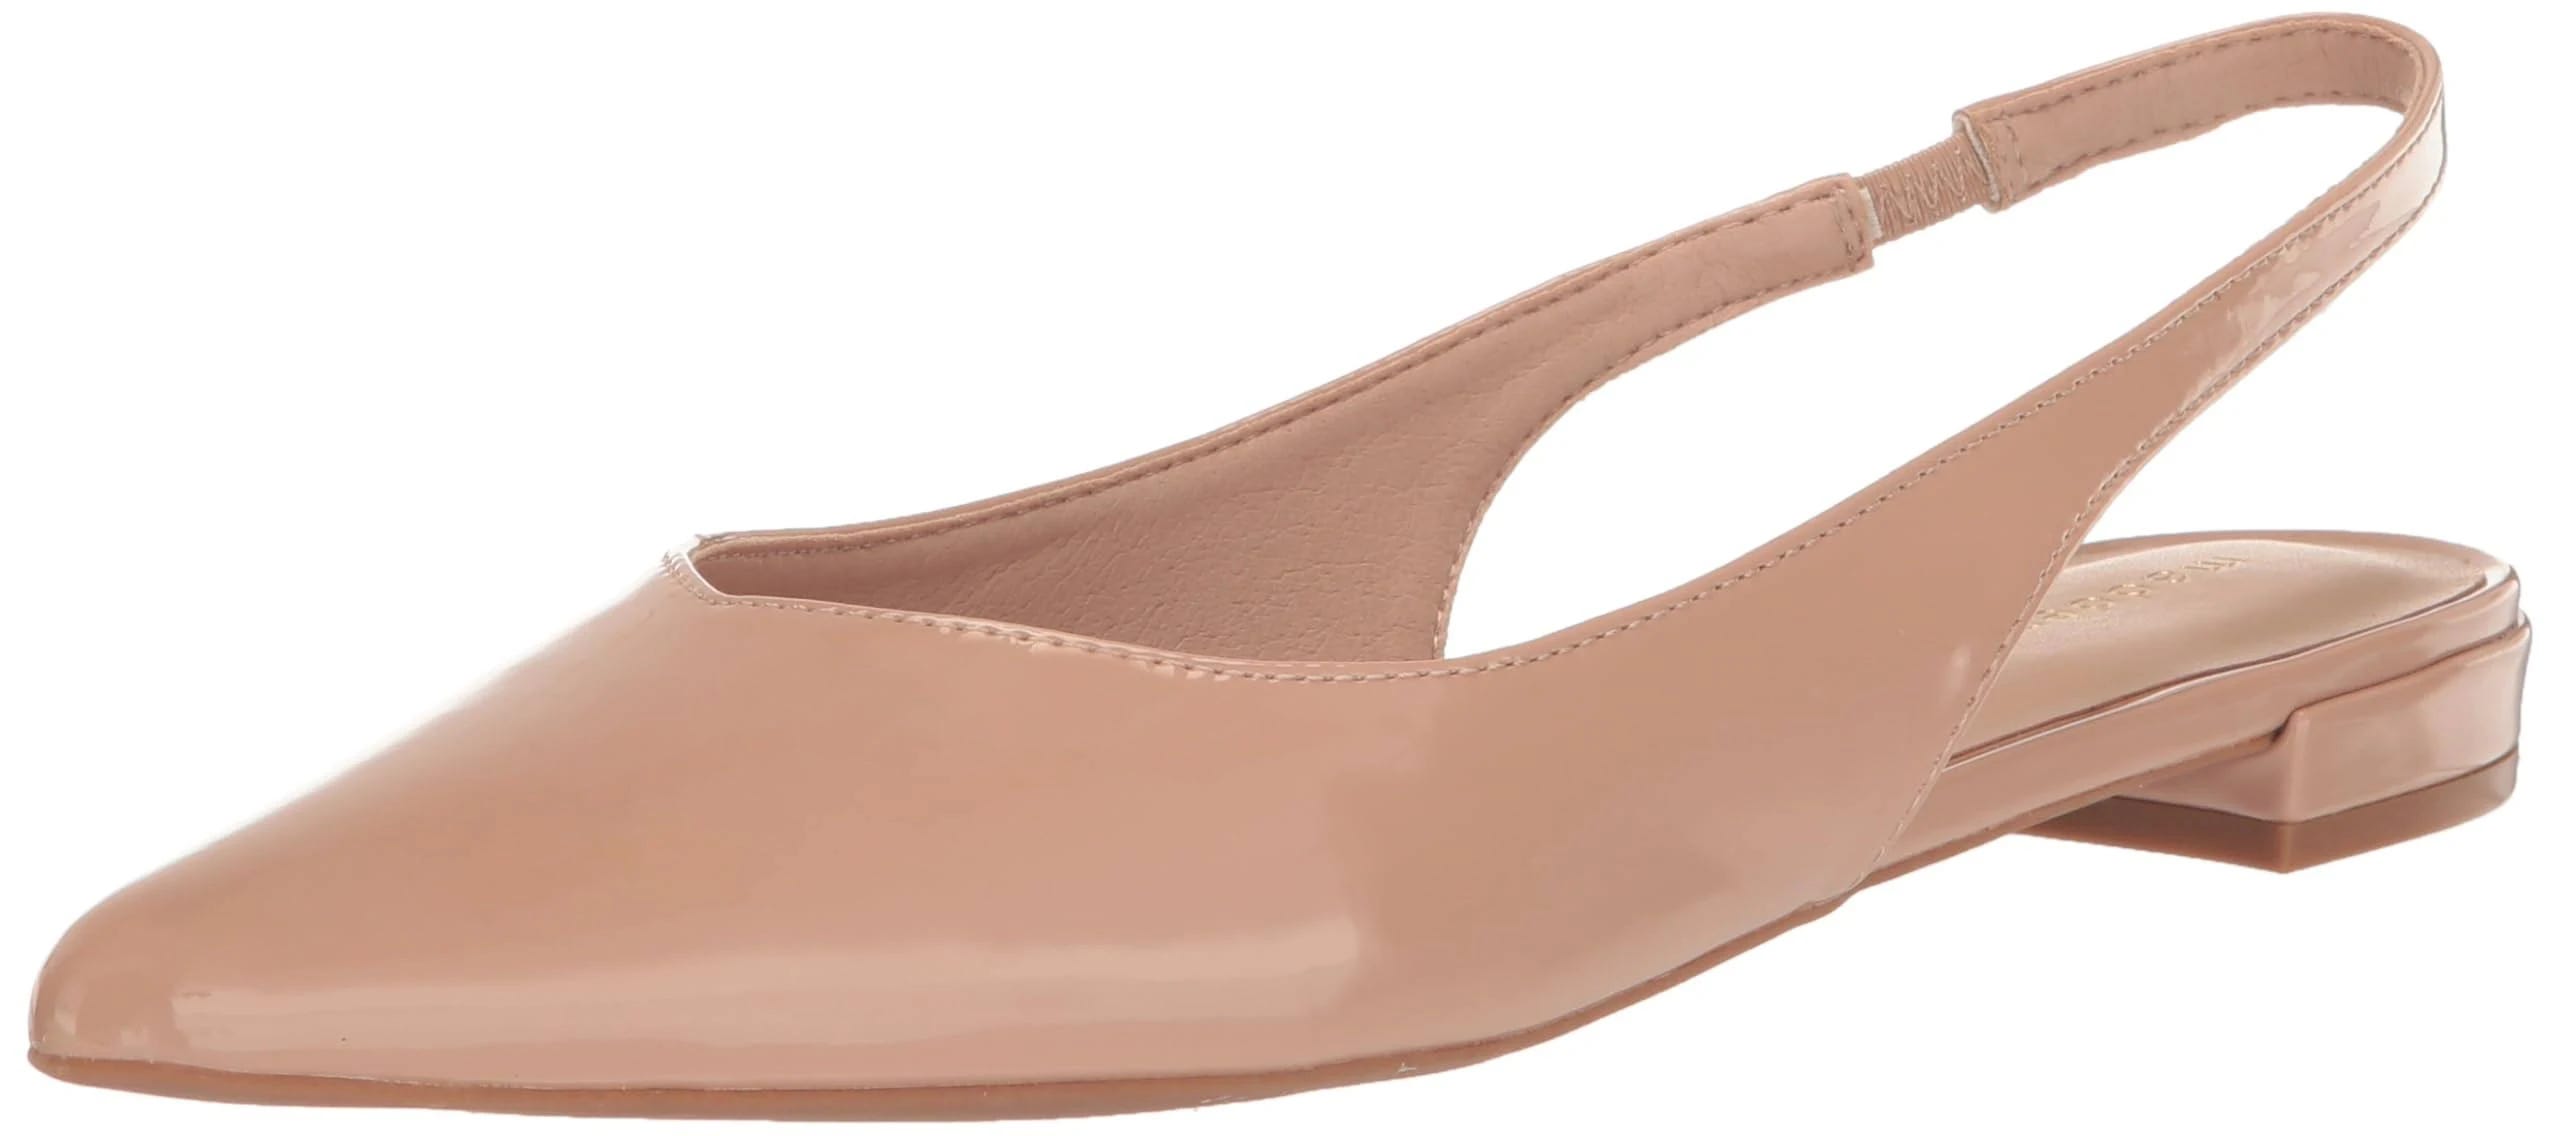 Madden Girl Delaneyy - Casual Slide Patent Nude Heels | Image